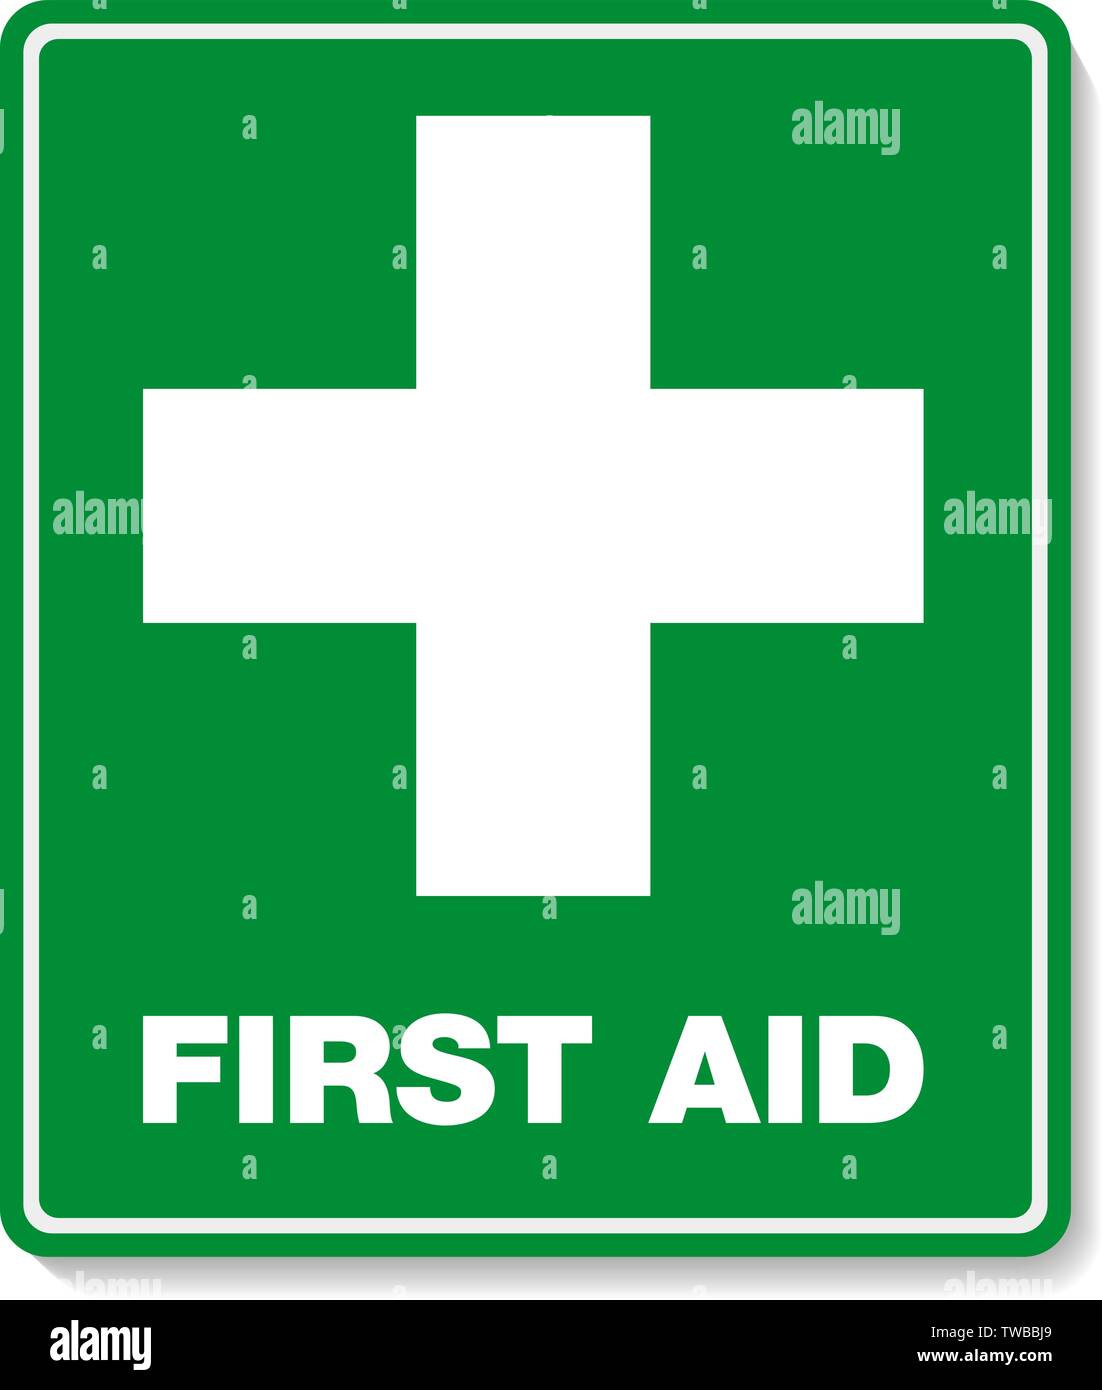 green FIRST AID sign with text and cross symbol Stock Vector